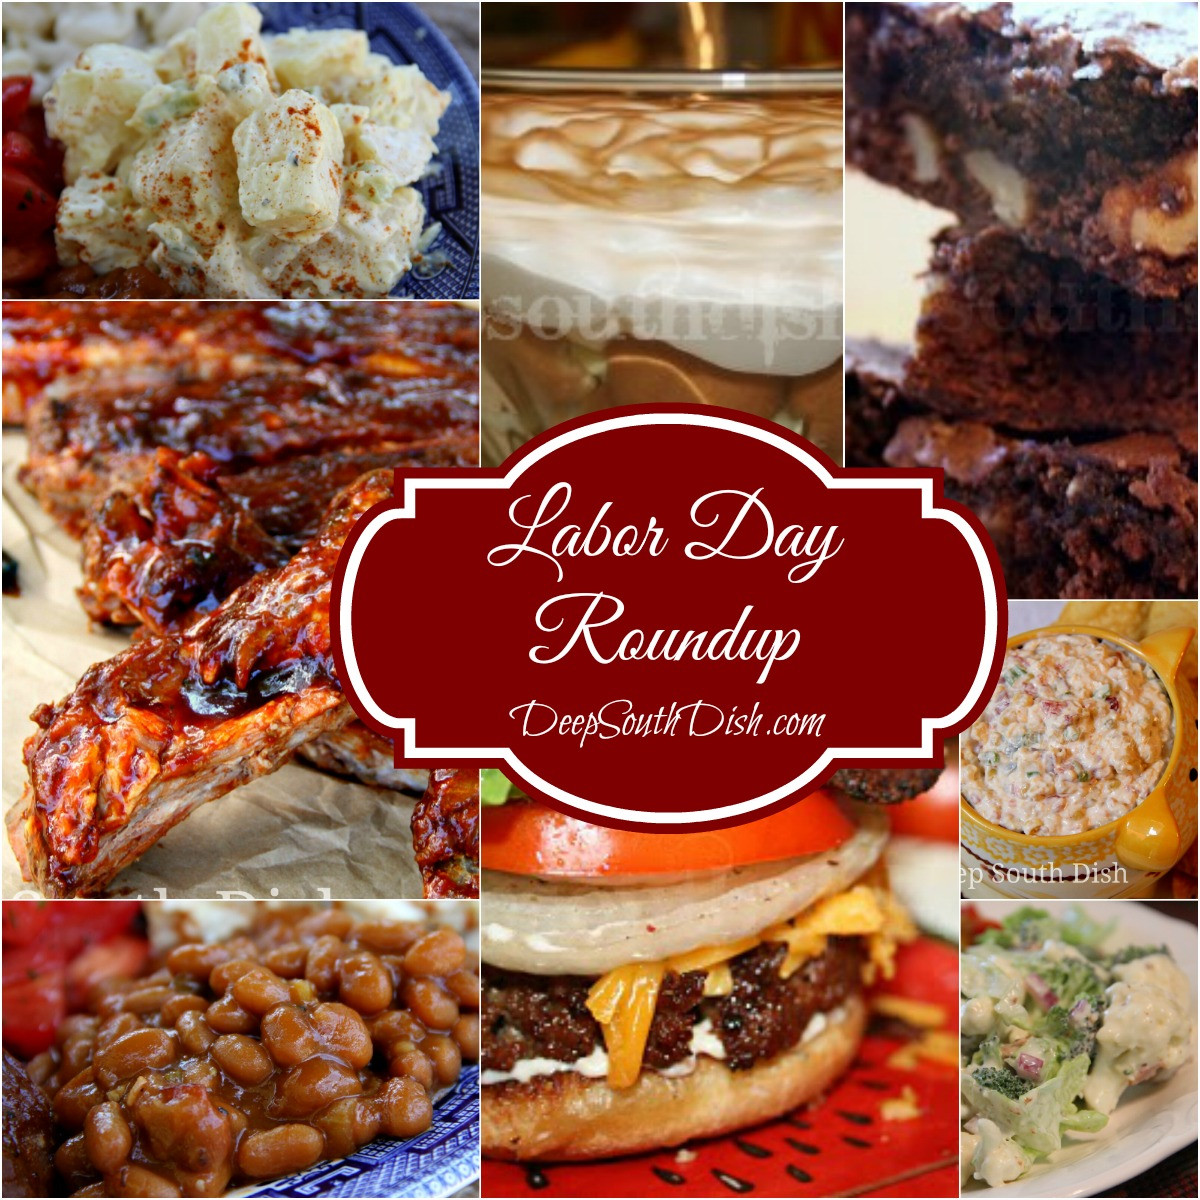 Labor Day Recipe
 Deep South Dish Labor Day Recipe Roundup Dips Burgers